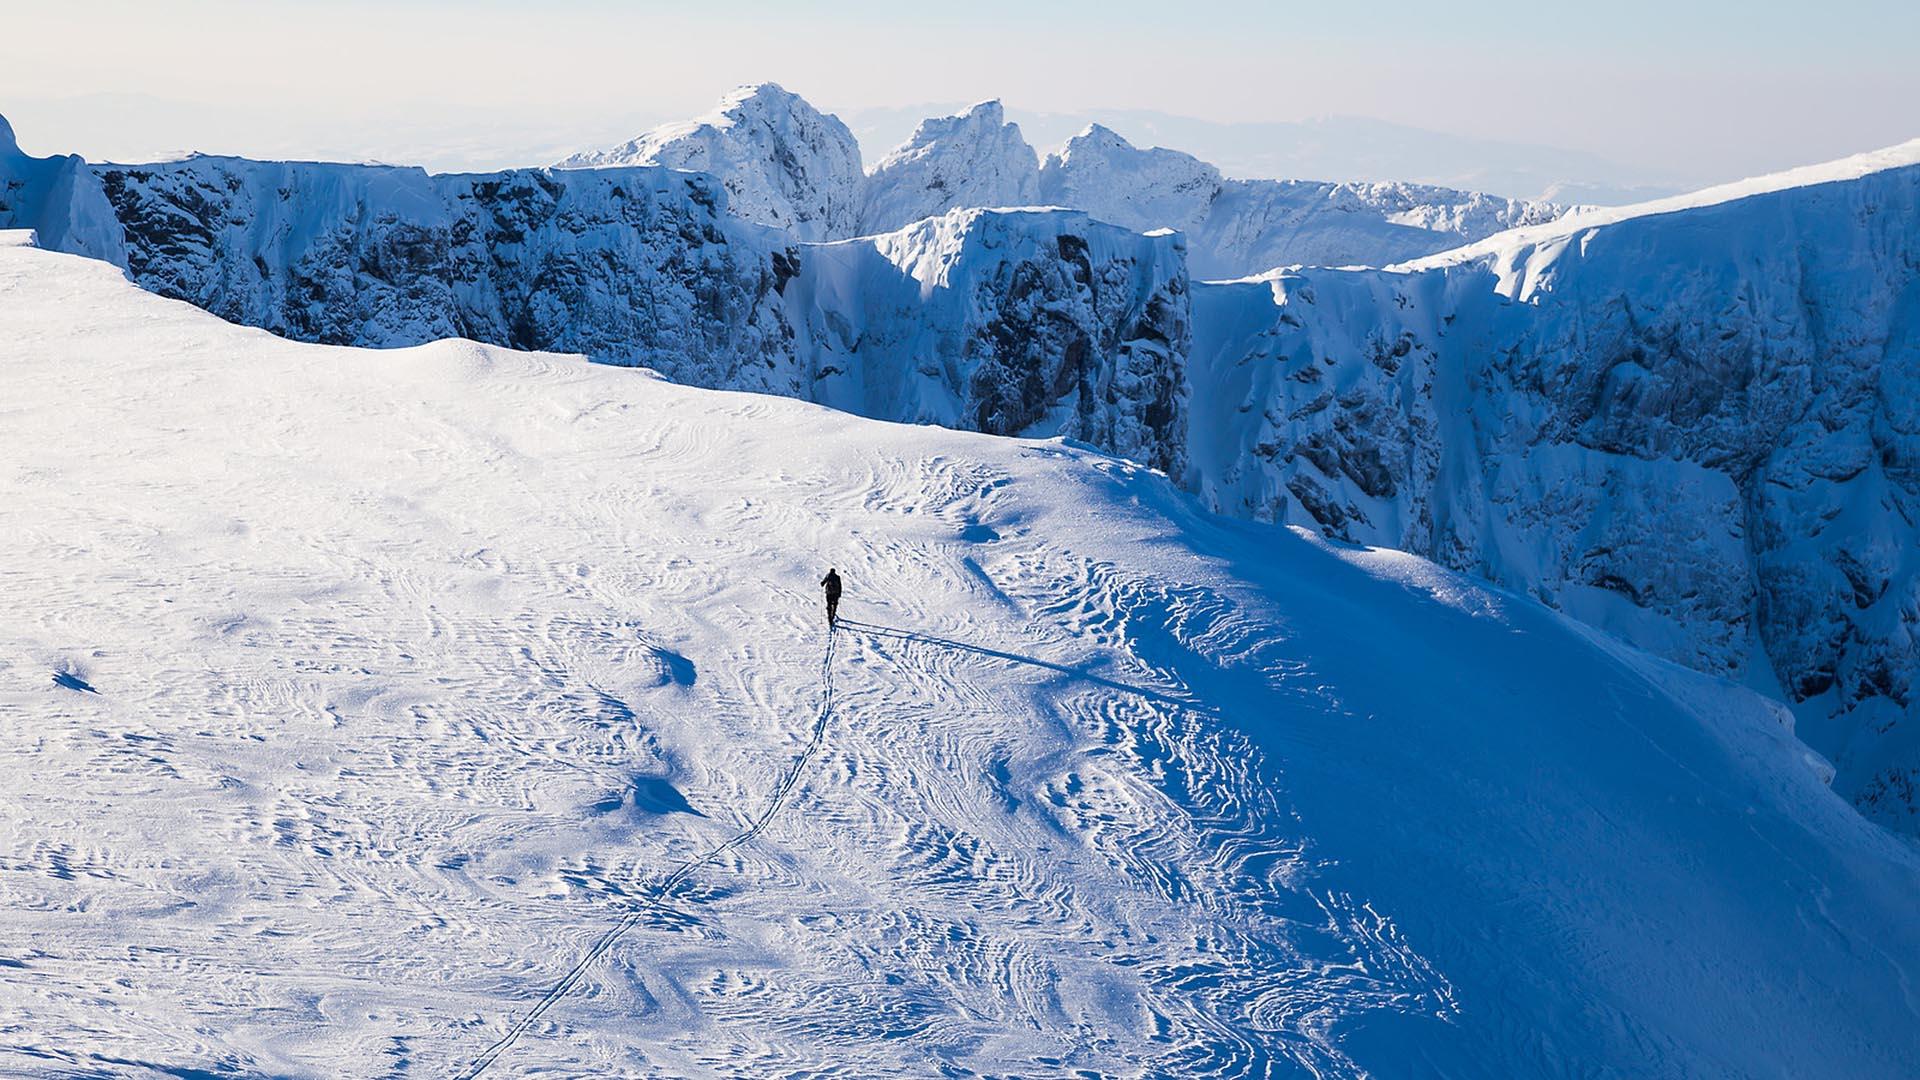 Person out on skis on mountains. Wild mountains in the background.